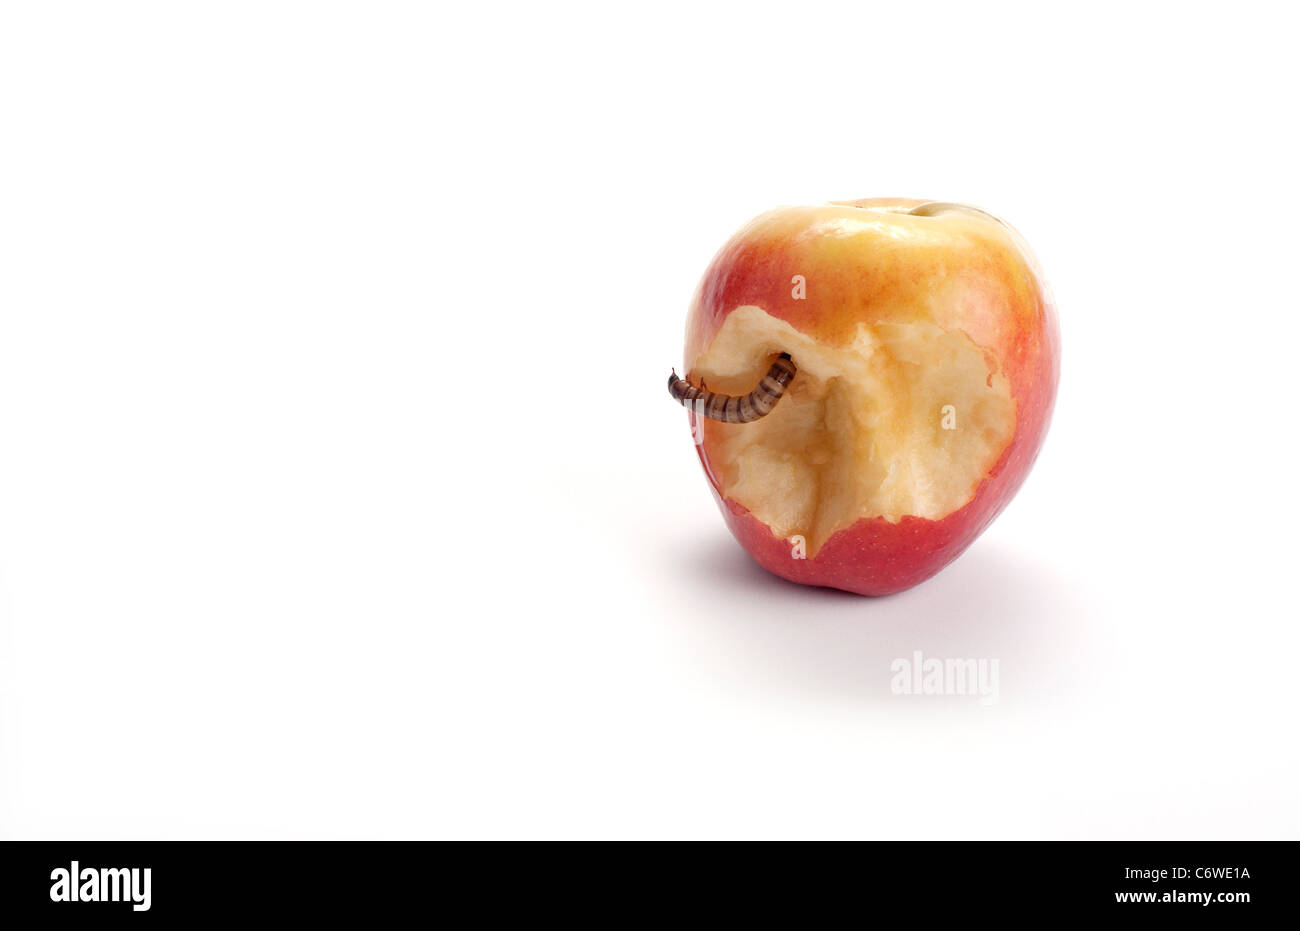 Red and yellow apple with a worm crawling out of the center. Stock Photo